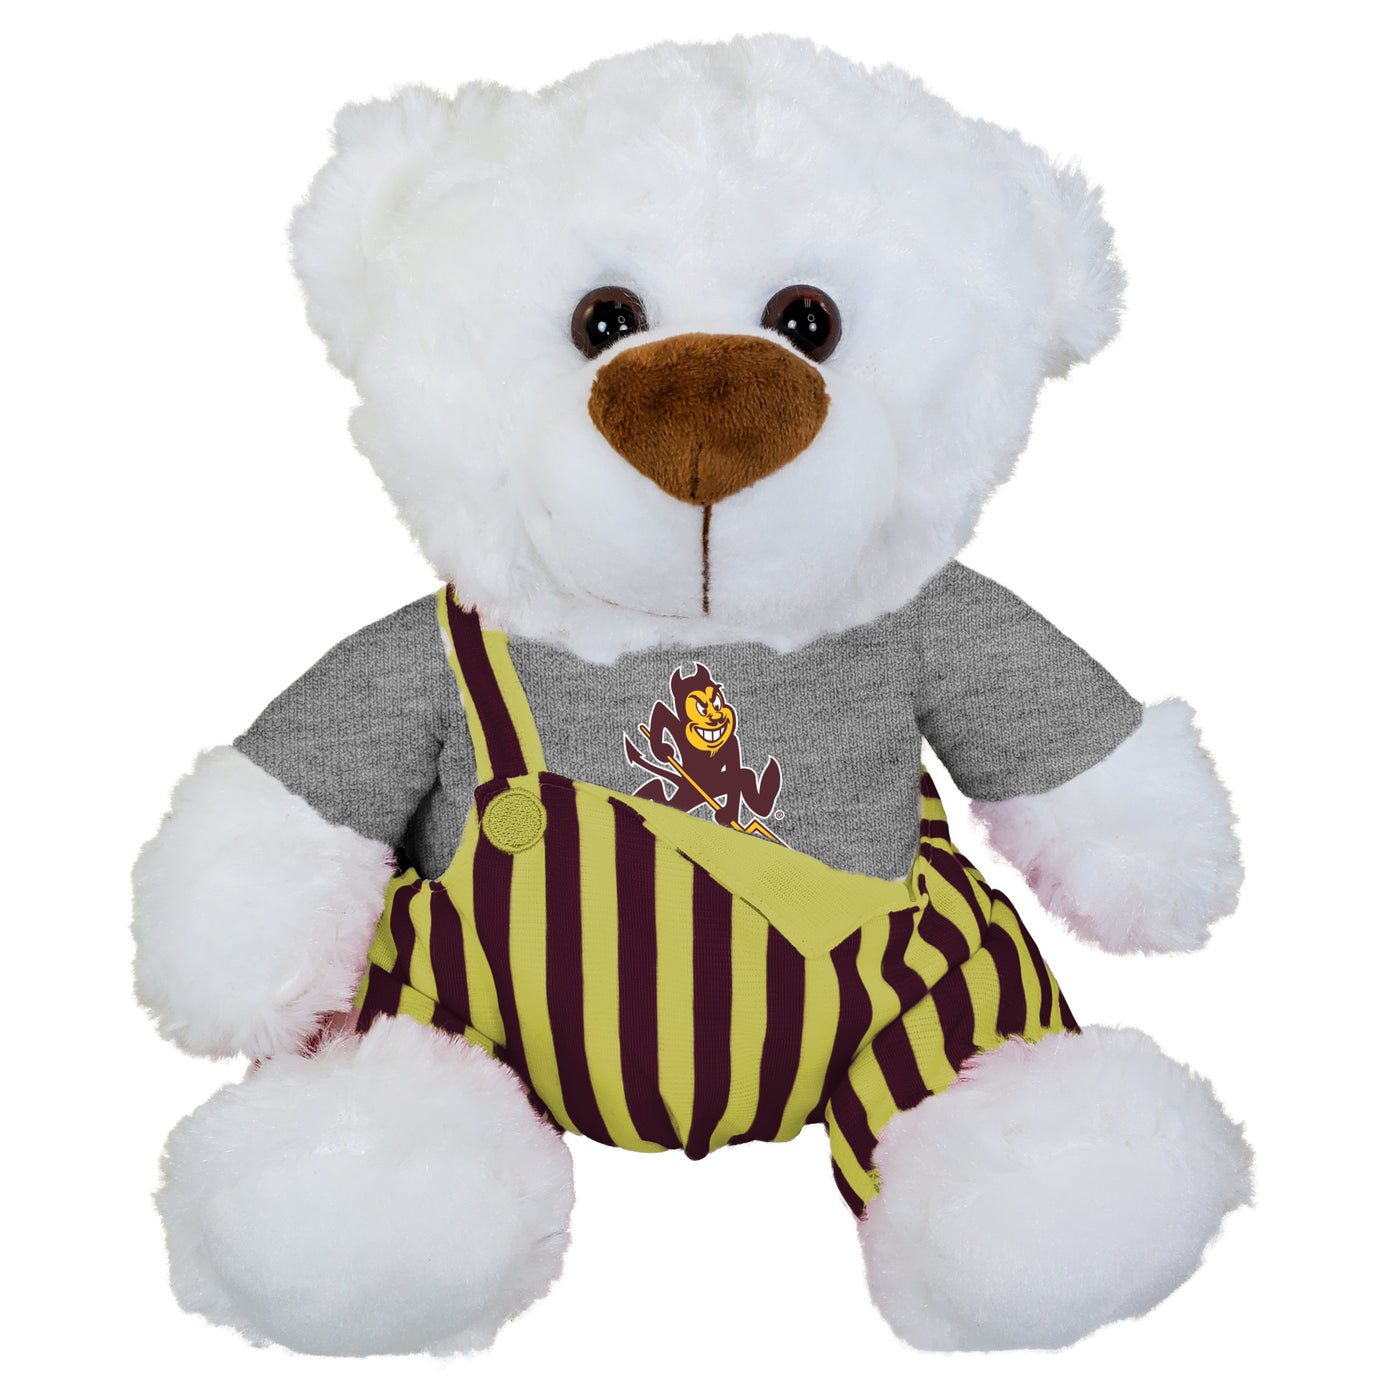 ASU stuffed White bear wearing gray shirt with Sparky  and a pair of maroon and gold striped overalls unbuttoned on one side